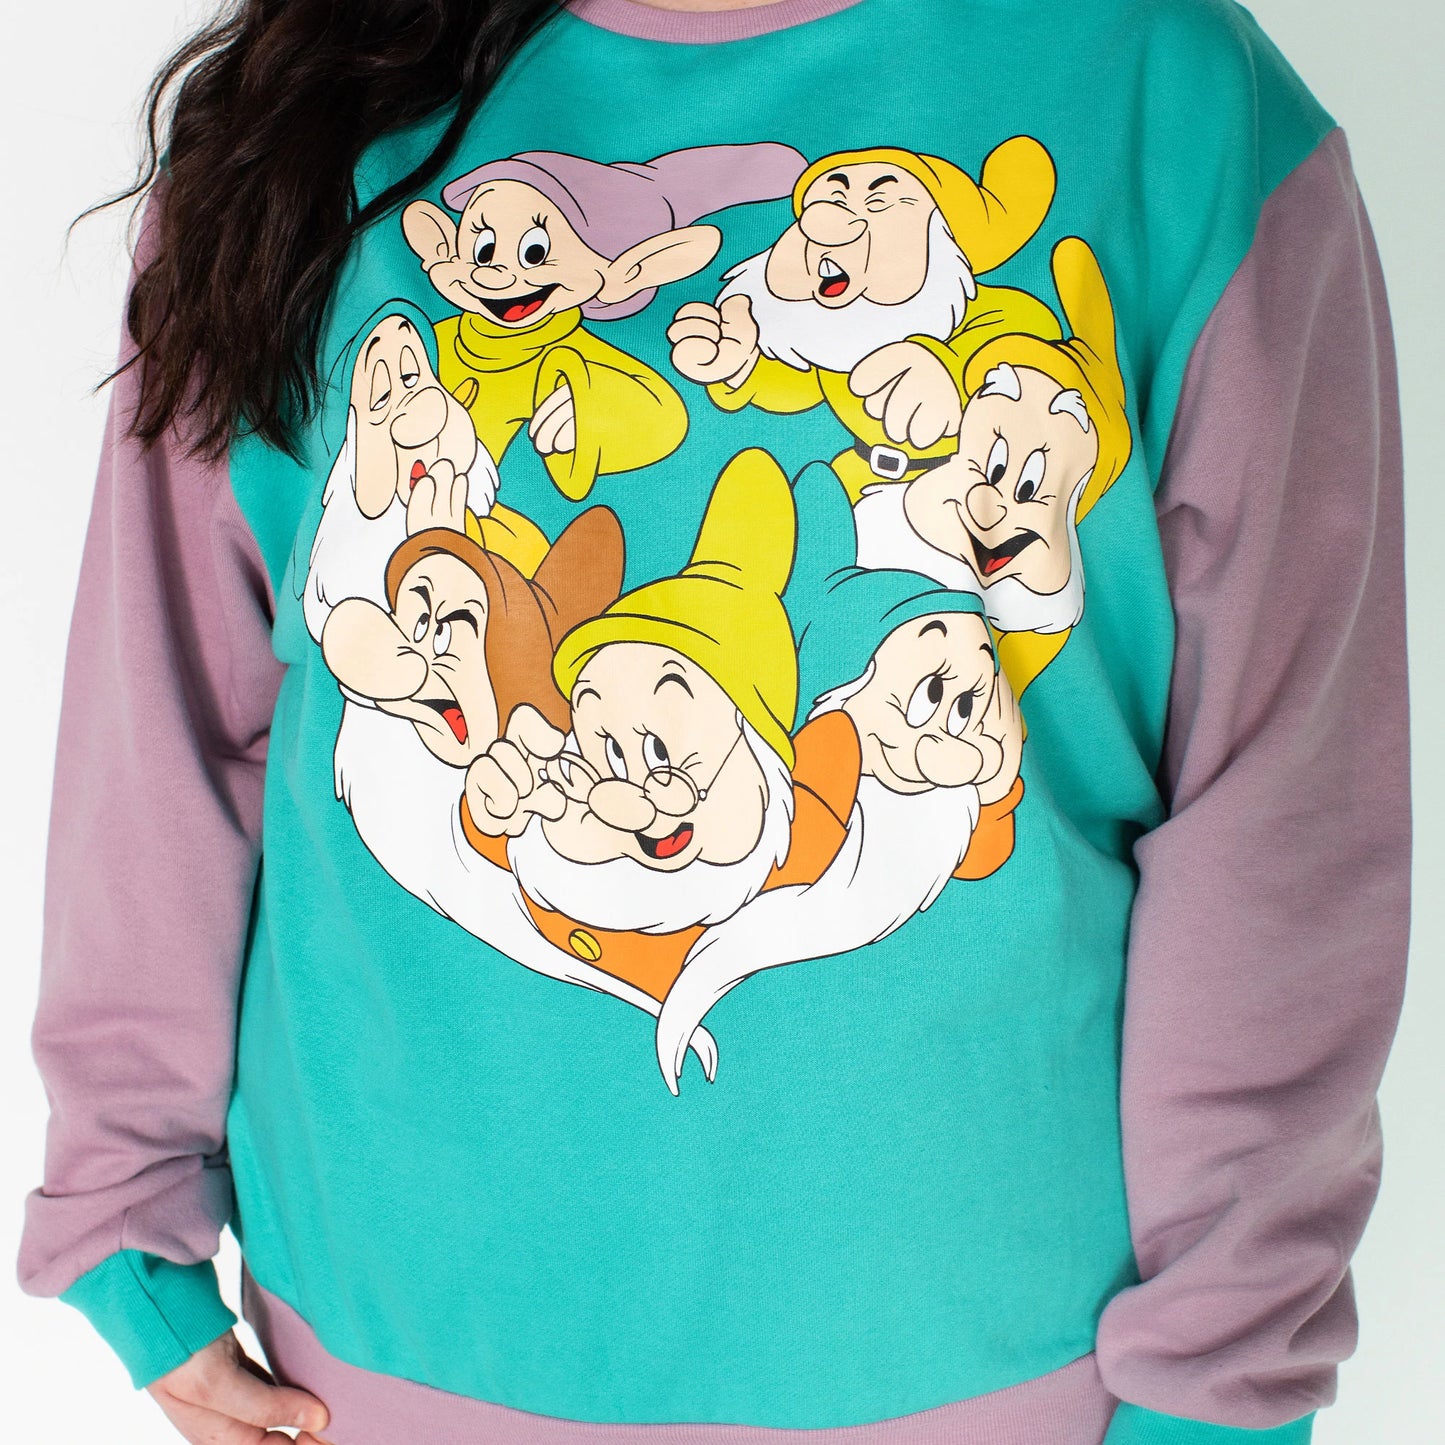 Snow White and the Seven Dwarfs (Disney) Crew Neck Sweater by